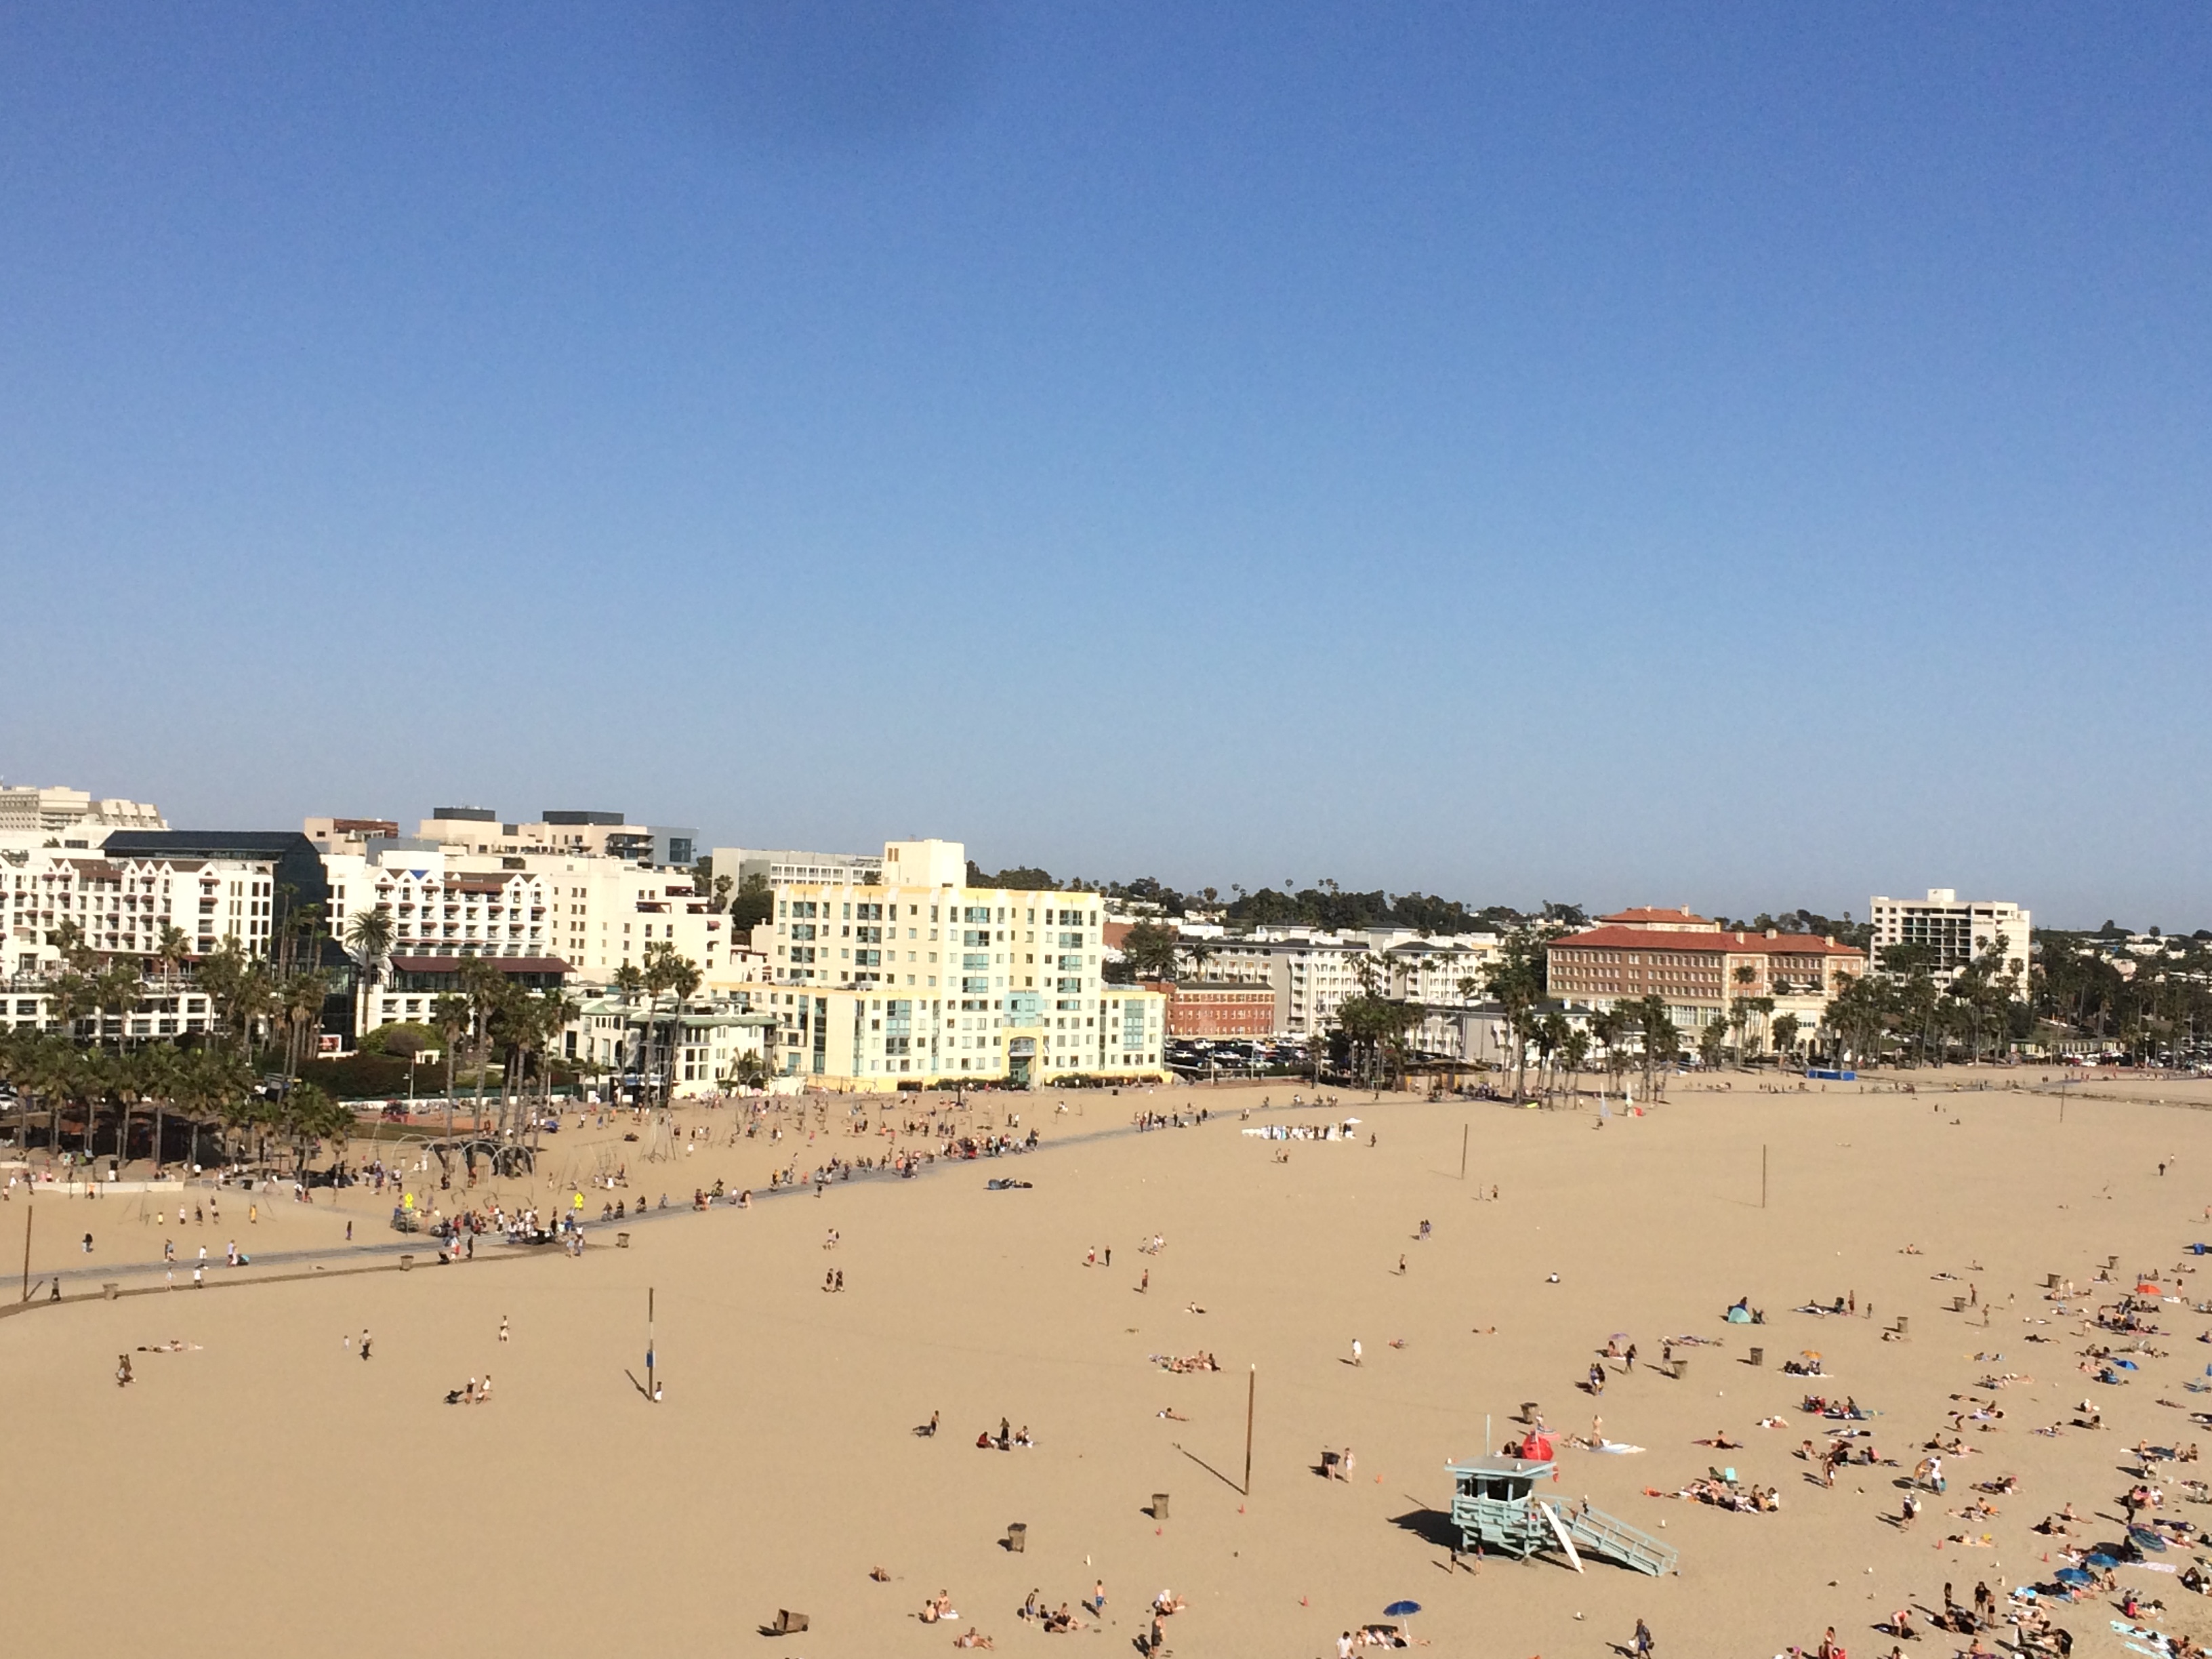 The Santa Monica beach is absolutely beautiful with a ton of activities for kids